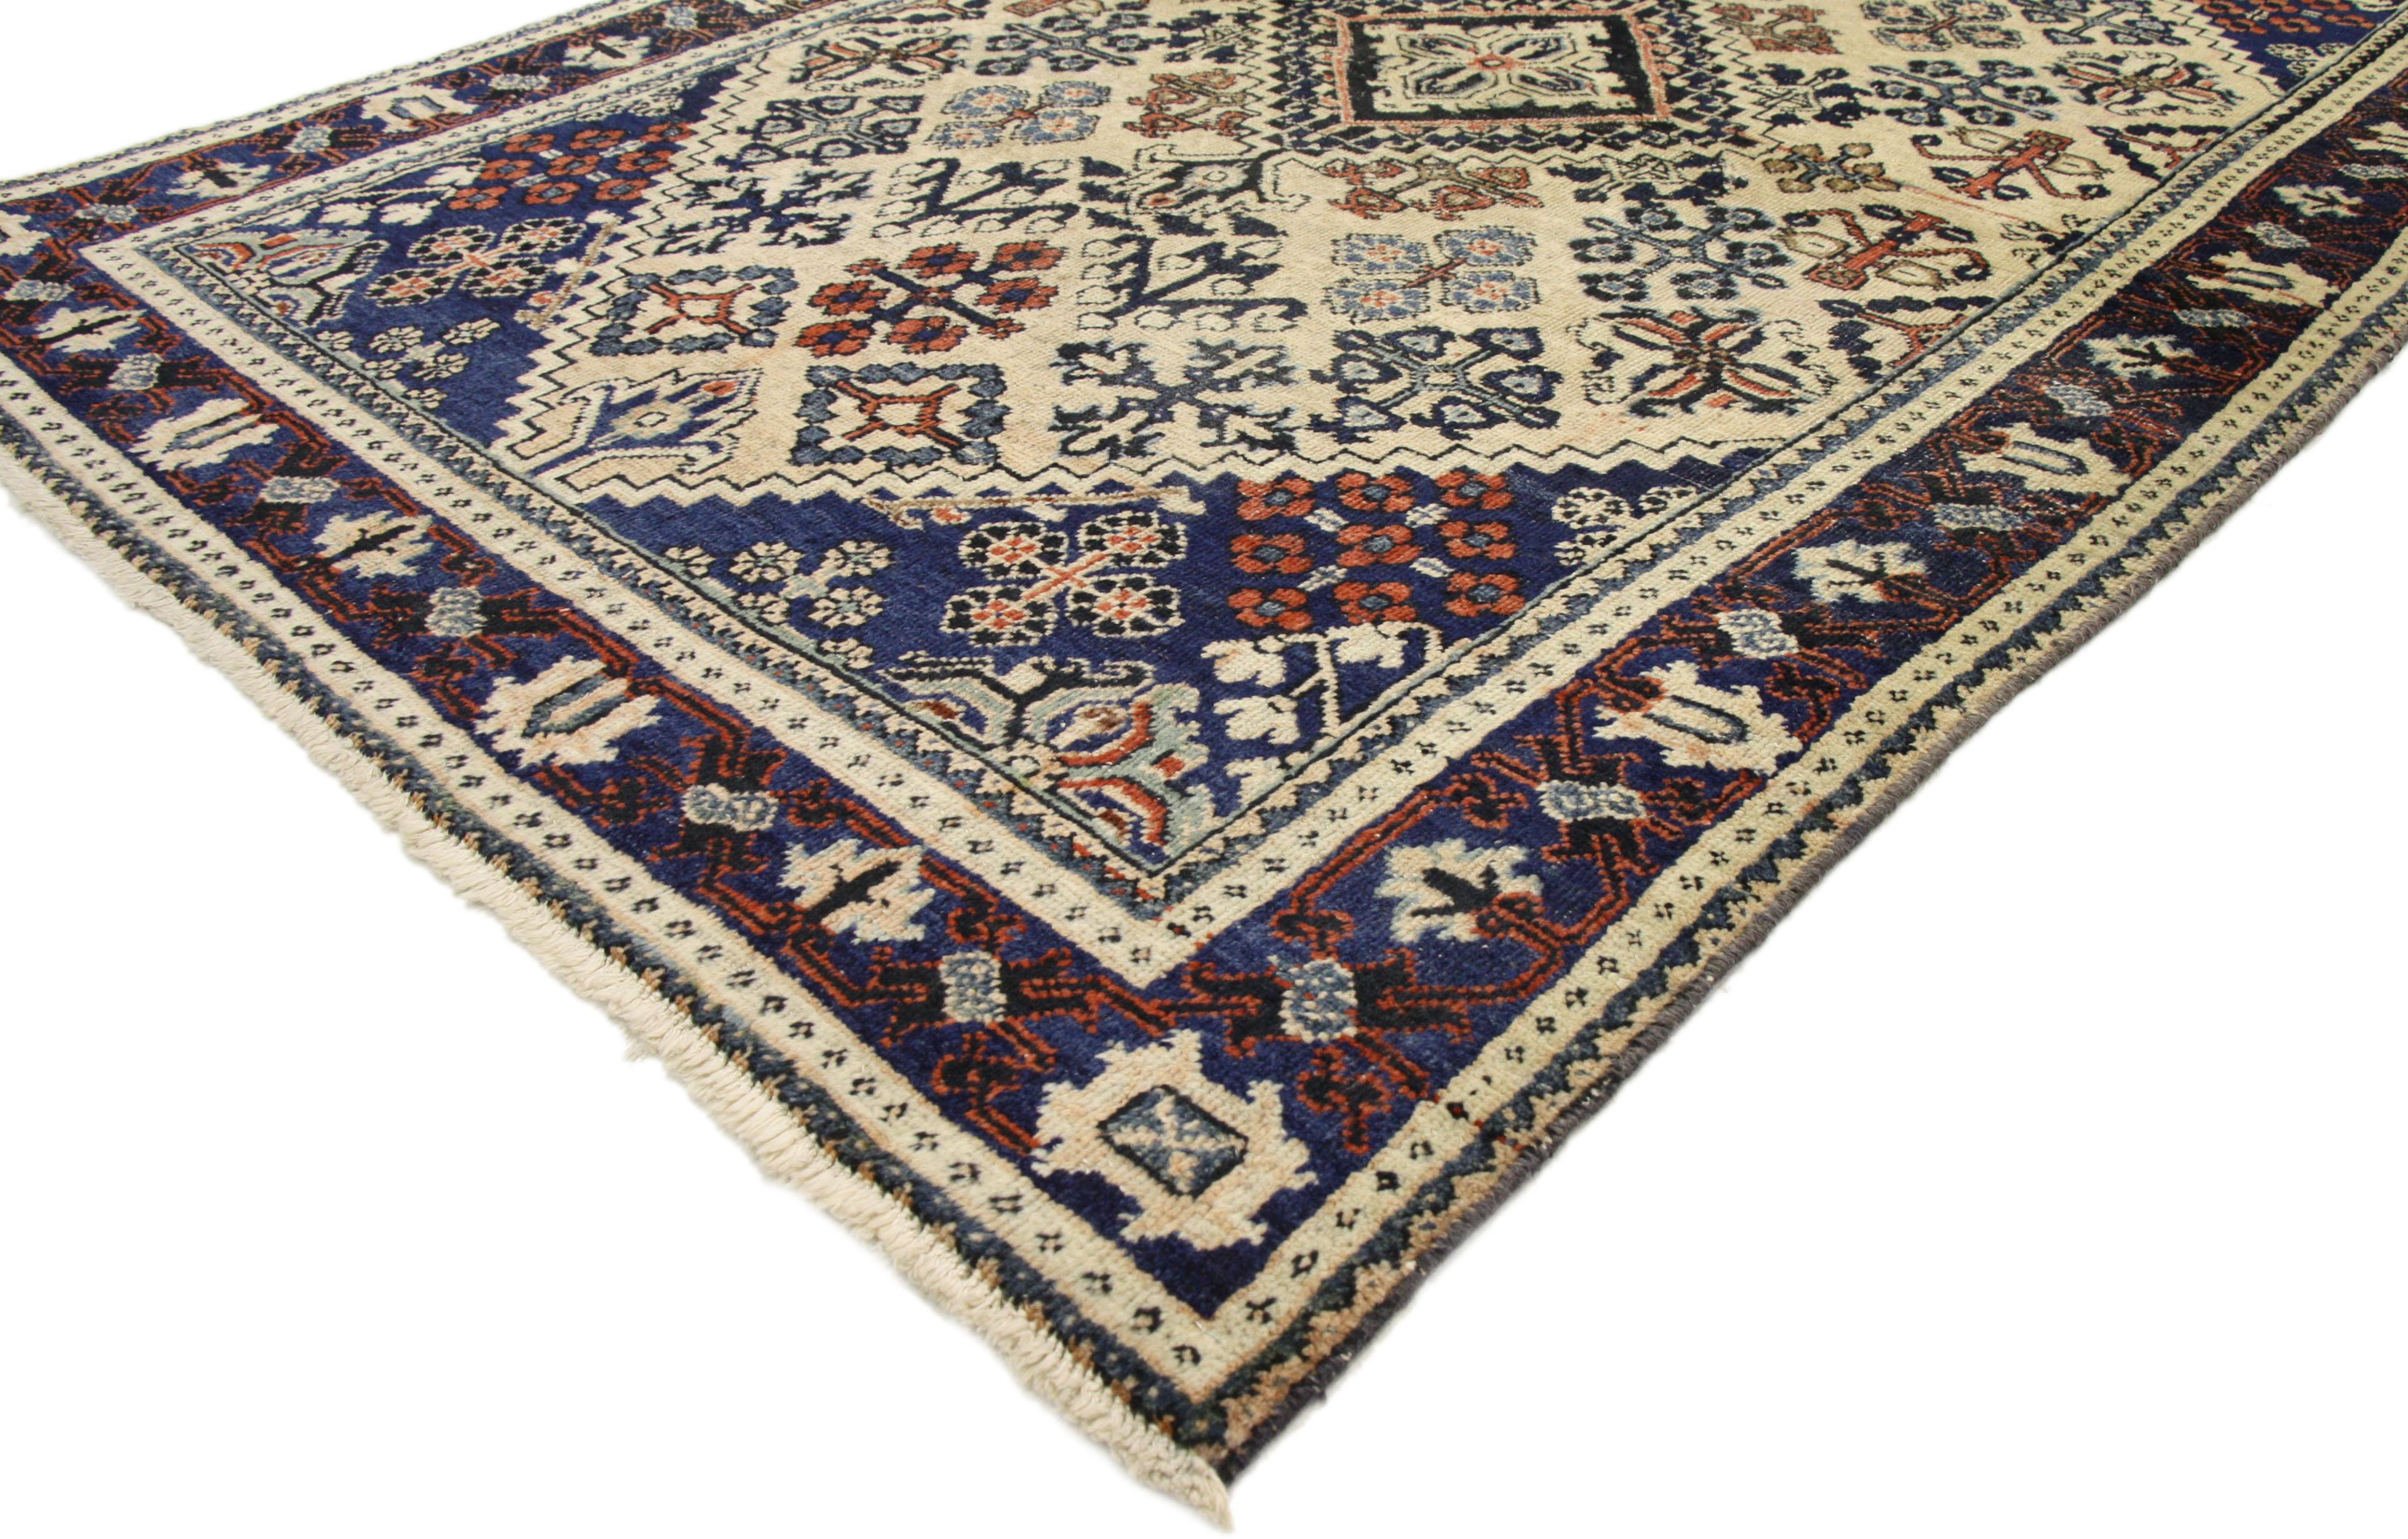 75217, vintage Persian Joshegan rug. With brilliant blues and warm beige colors inspired by Italy combined with modern and rustic, this hand knotted Persian Joshegan rug is well-balanced and poised to impress. It features a central lozenge medallion